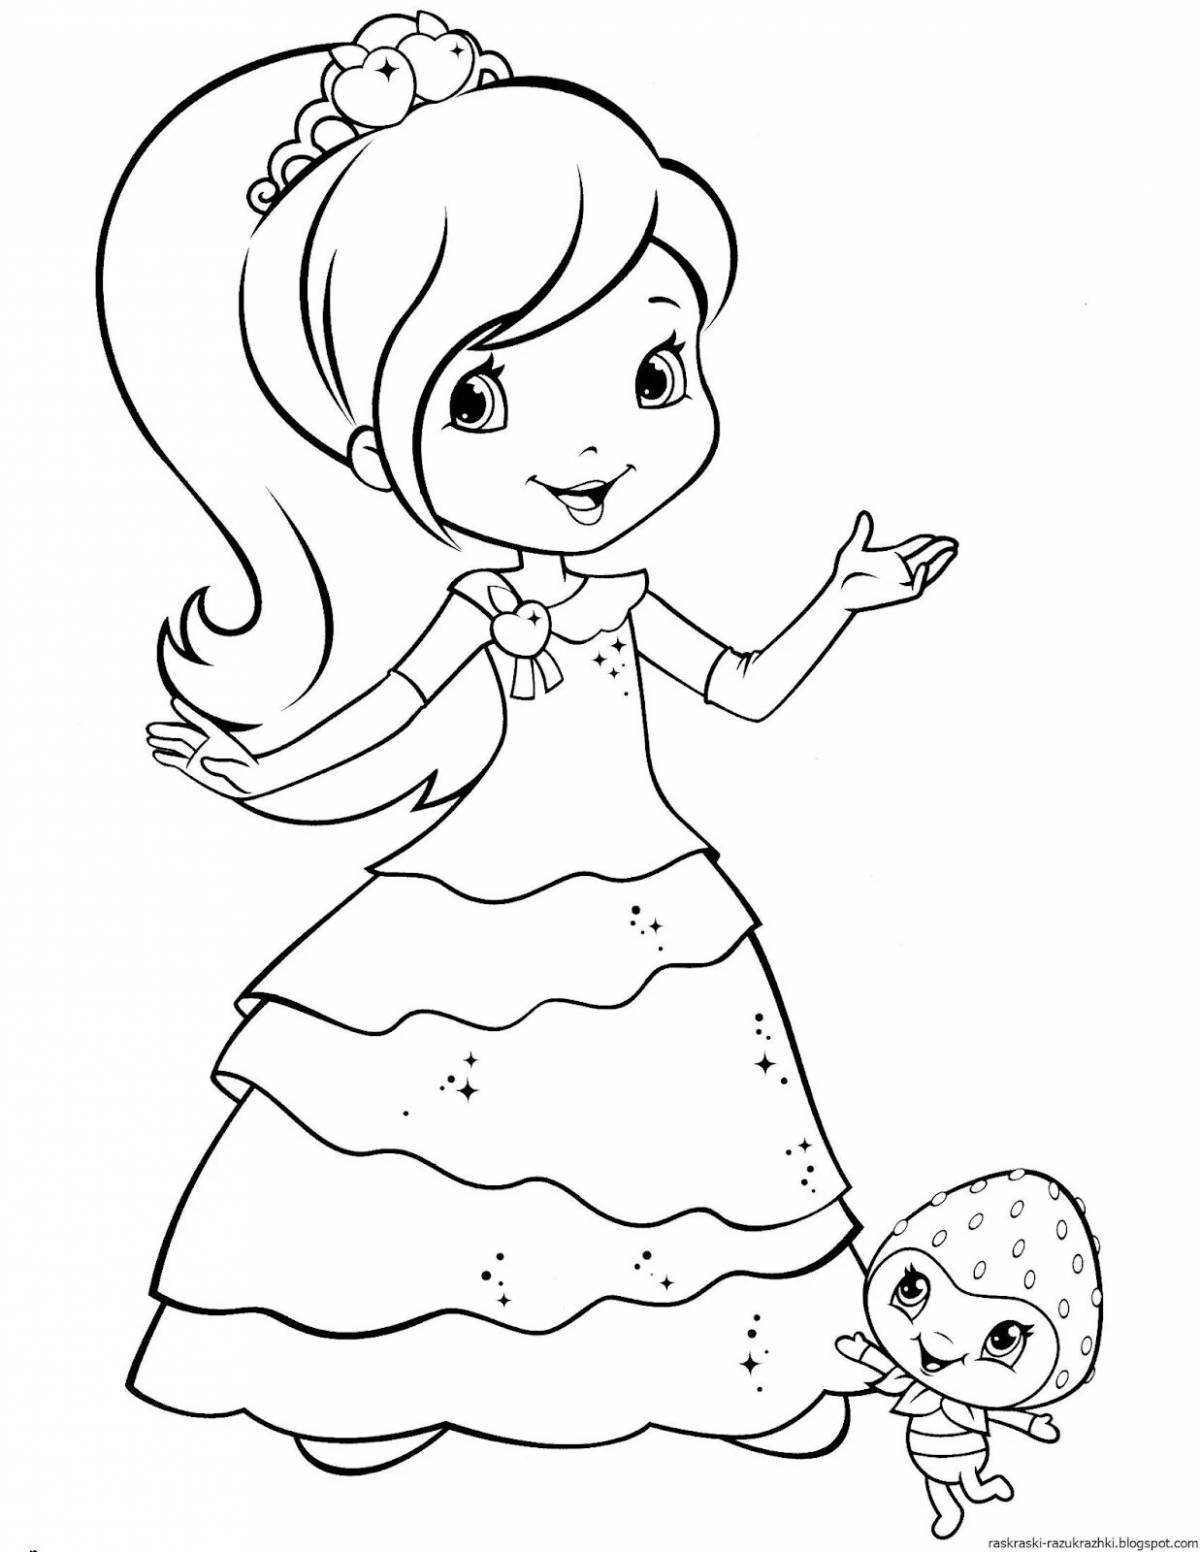 Dazzling coloring pages princesses 4-5 years old